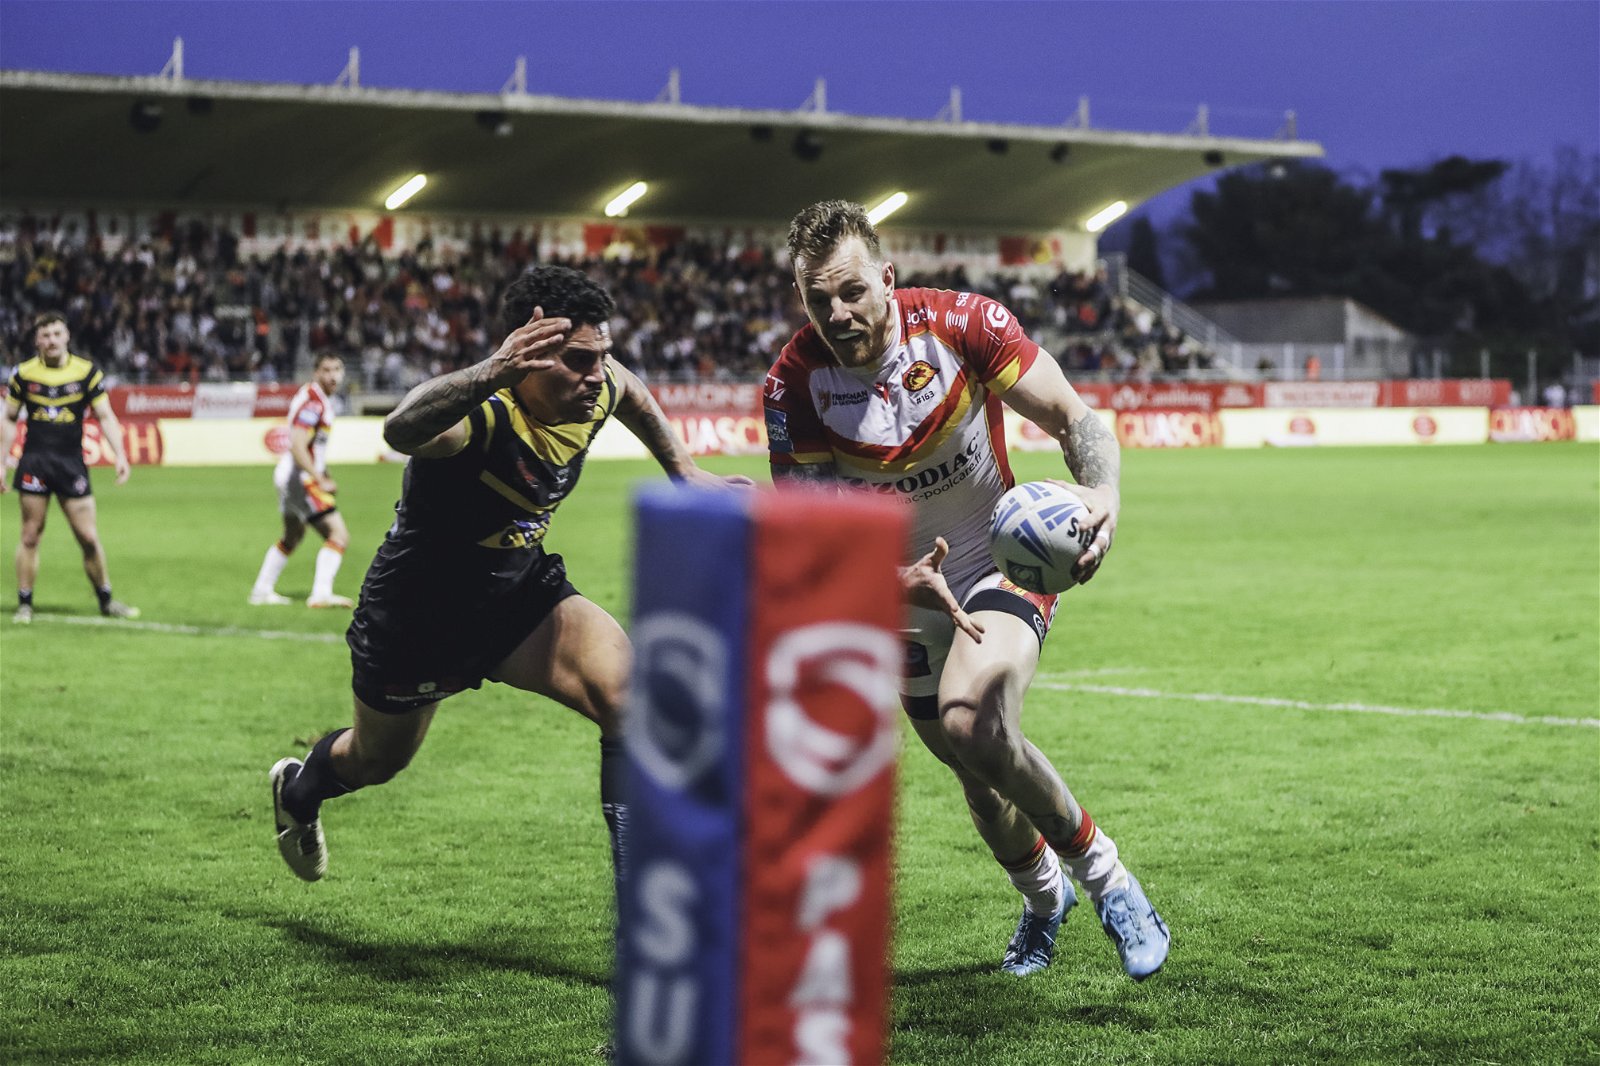 Castleford Tigers Charbel Tasipale attempts to stop Catalans Dragons winger Tom Johnstone from scoring a try.